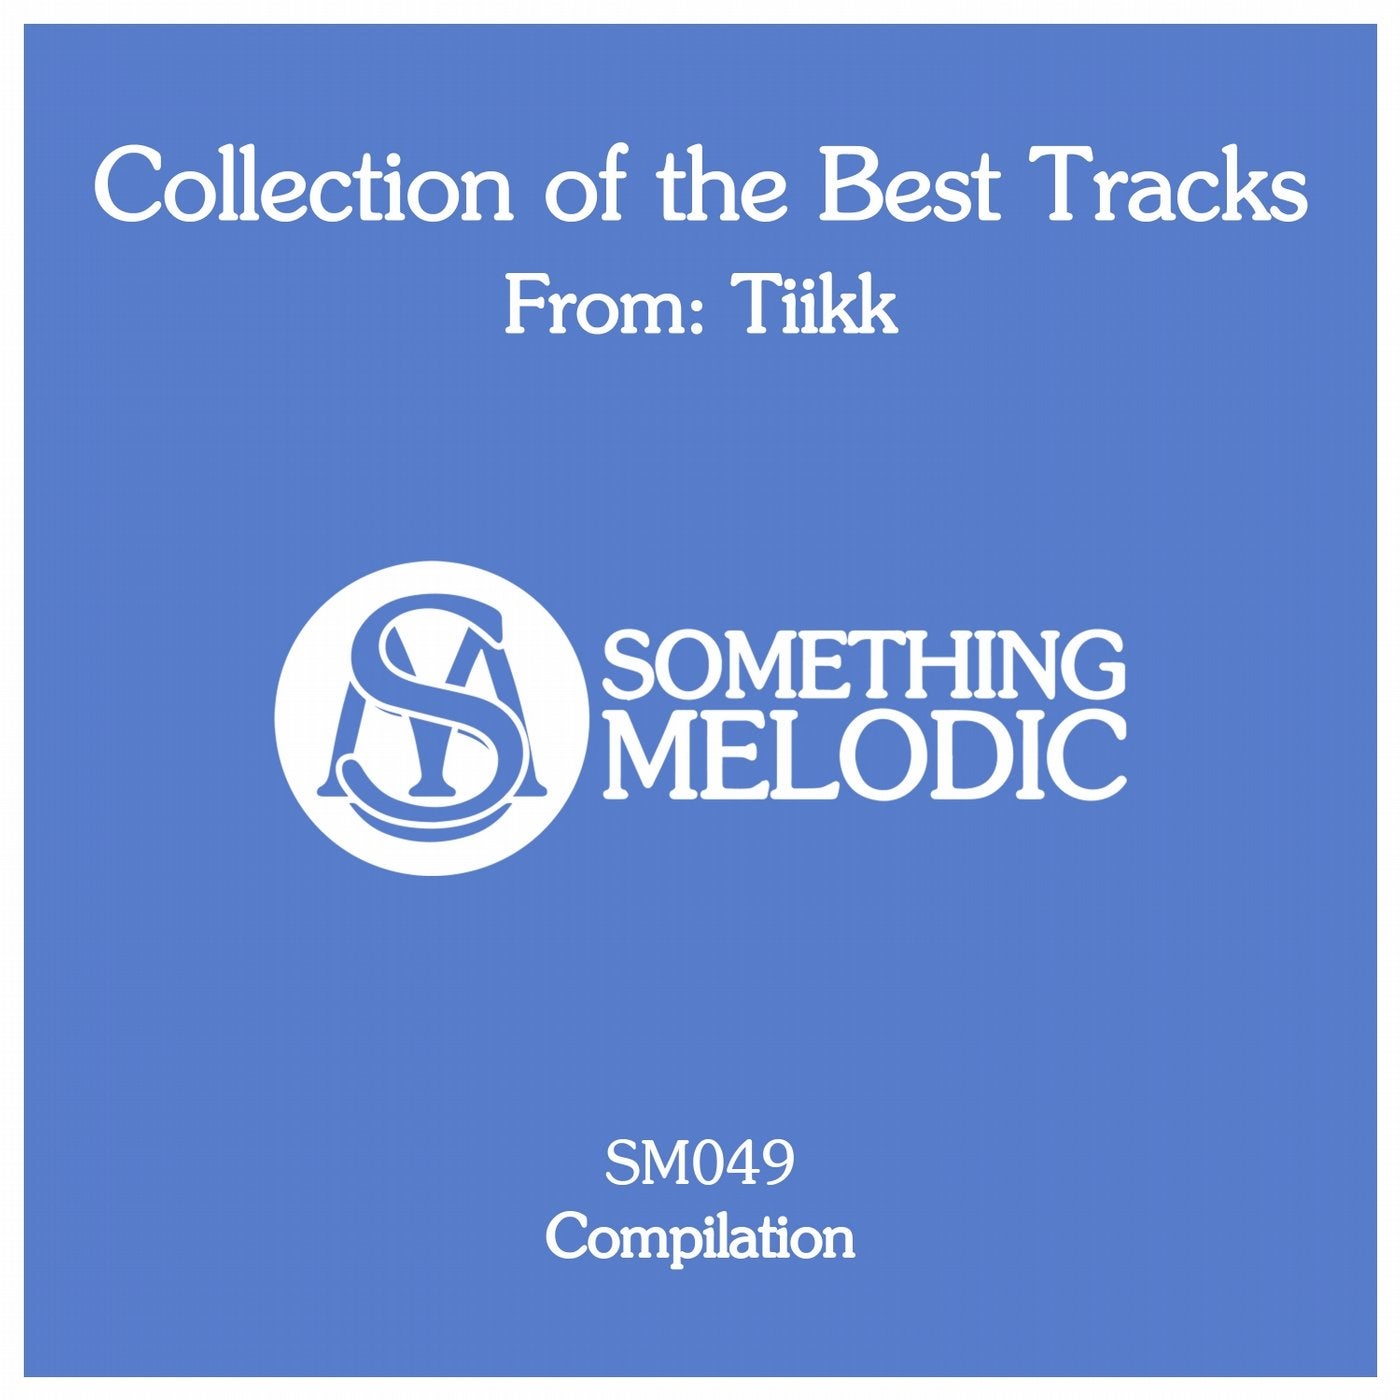 Collection of the Best Tracks From: Tiikk